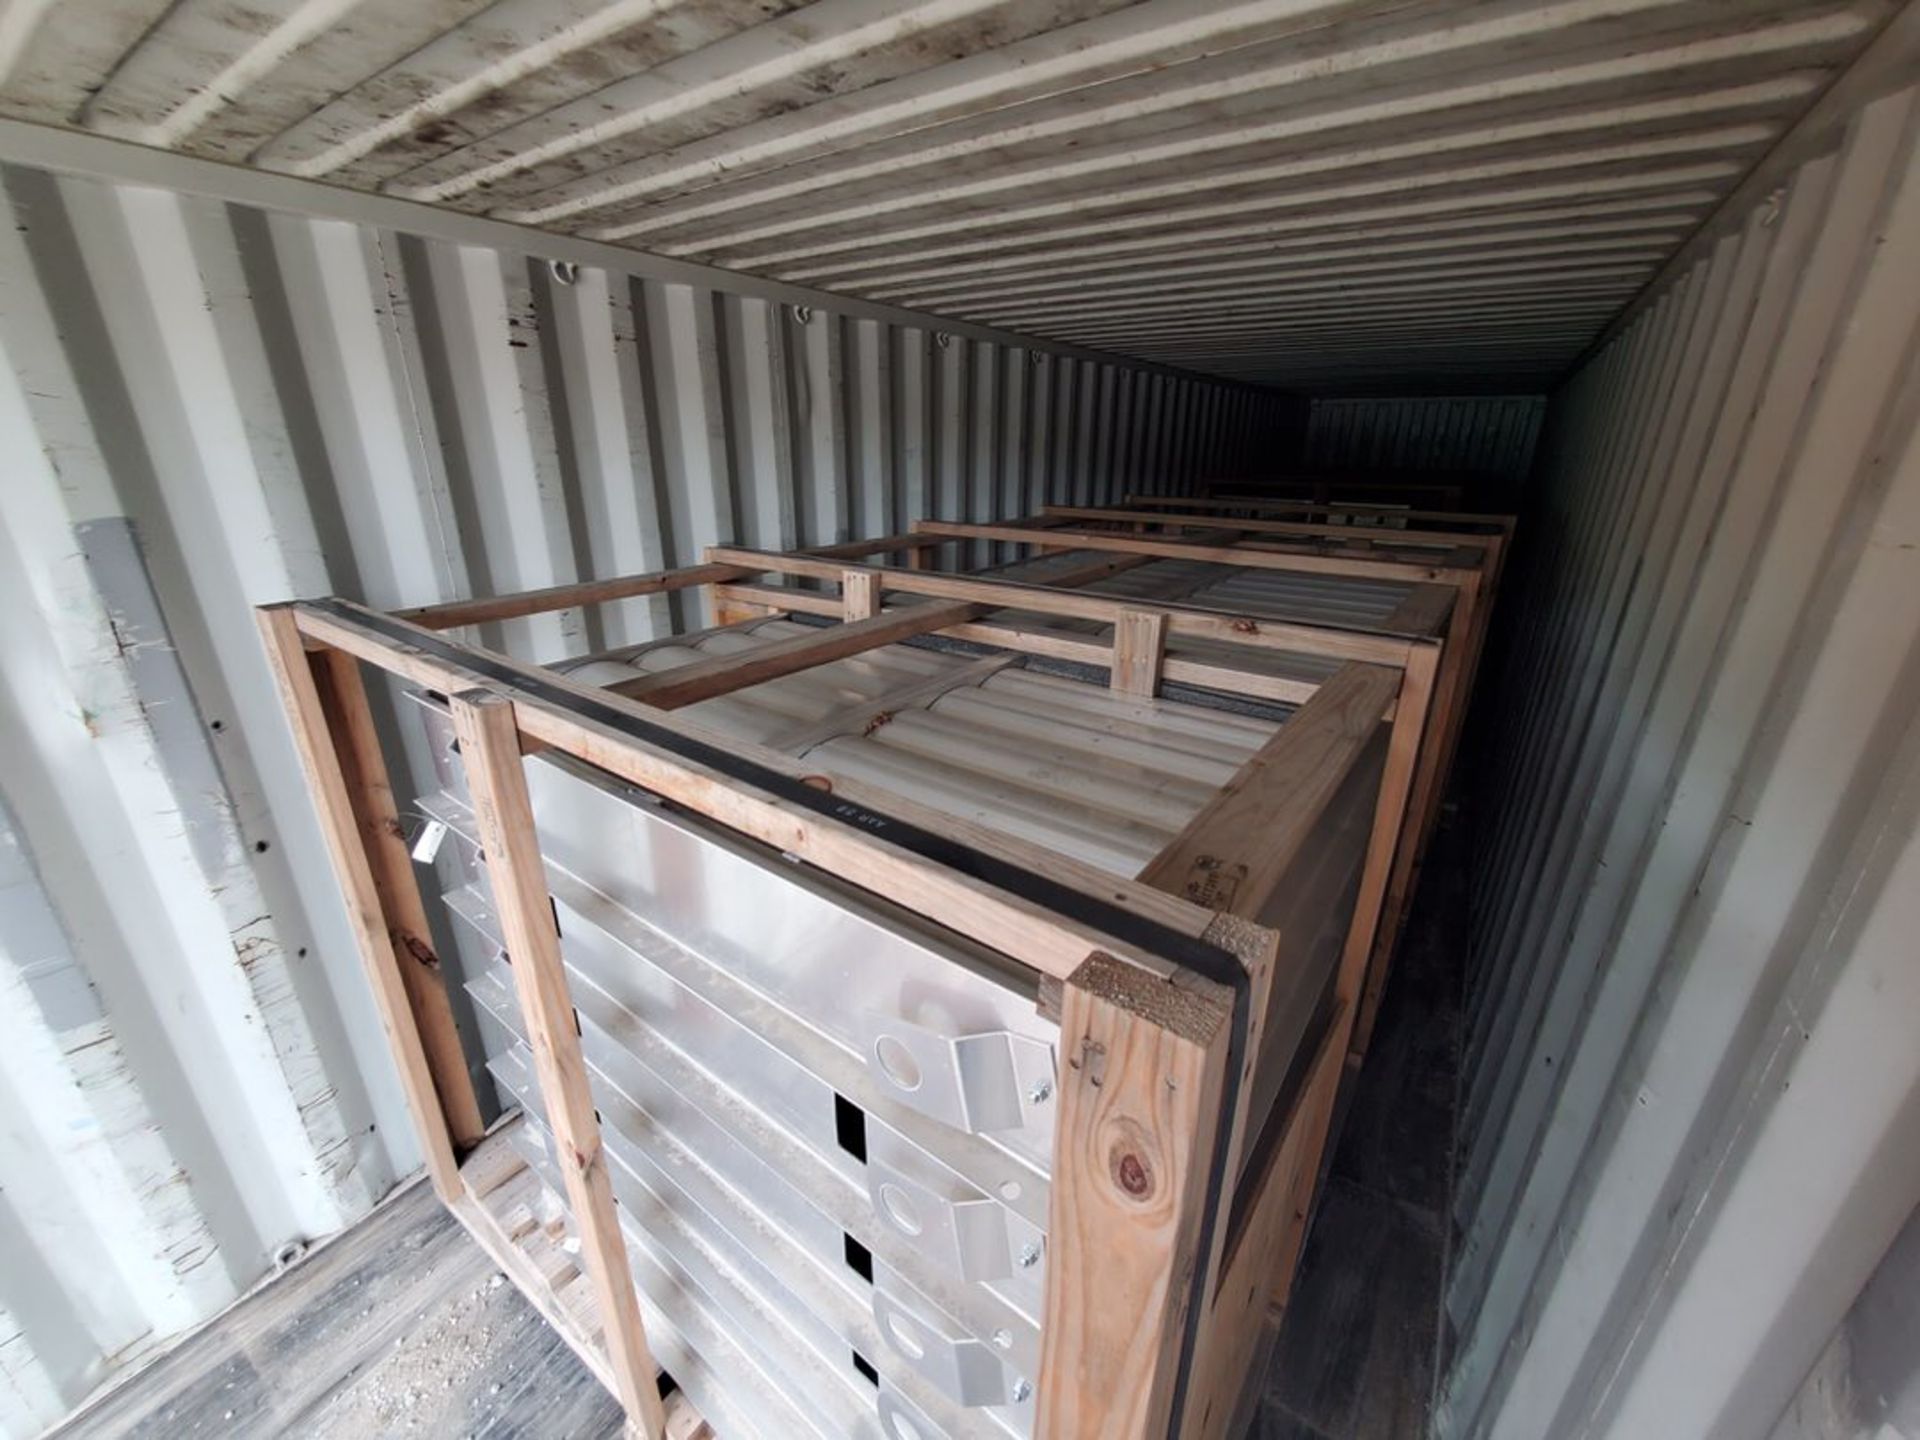 K-Line Shipping Container, Dims: 40'L x 8'W x 8'6'H; W/ Cooler Contents; To Include But Not - Image 23 of 24